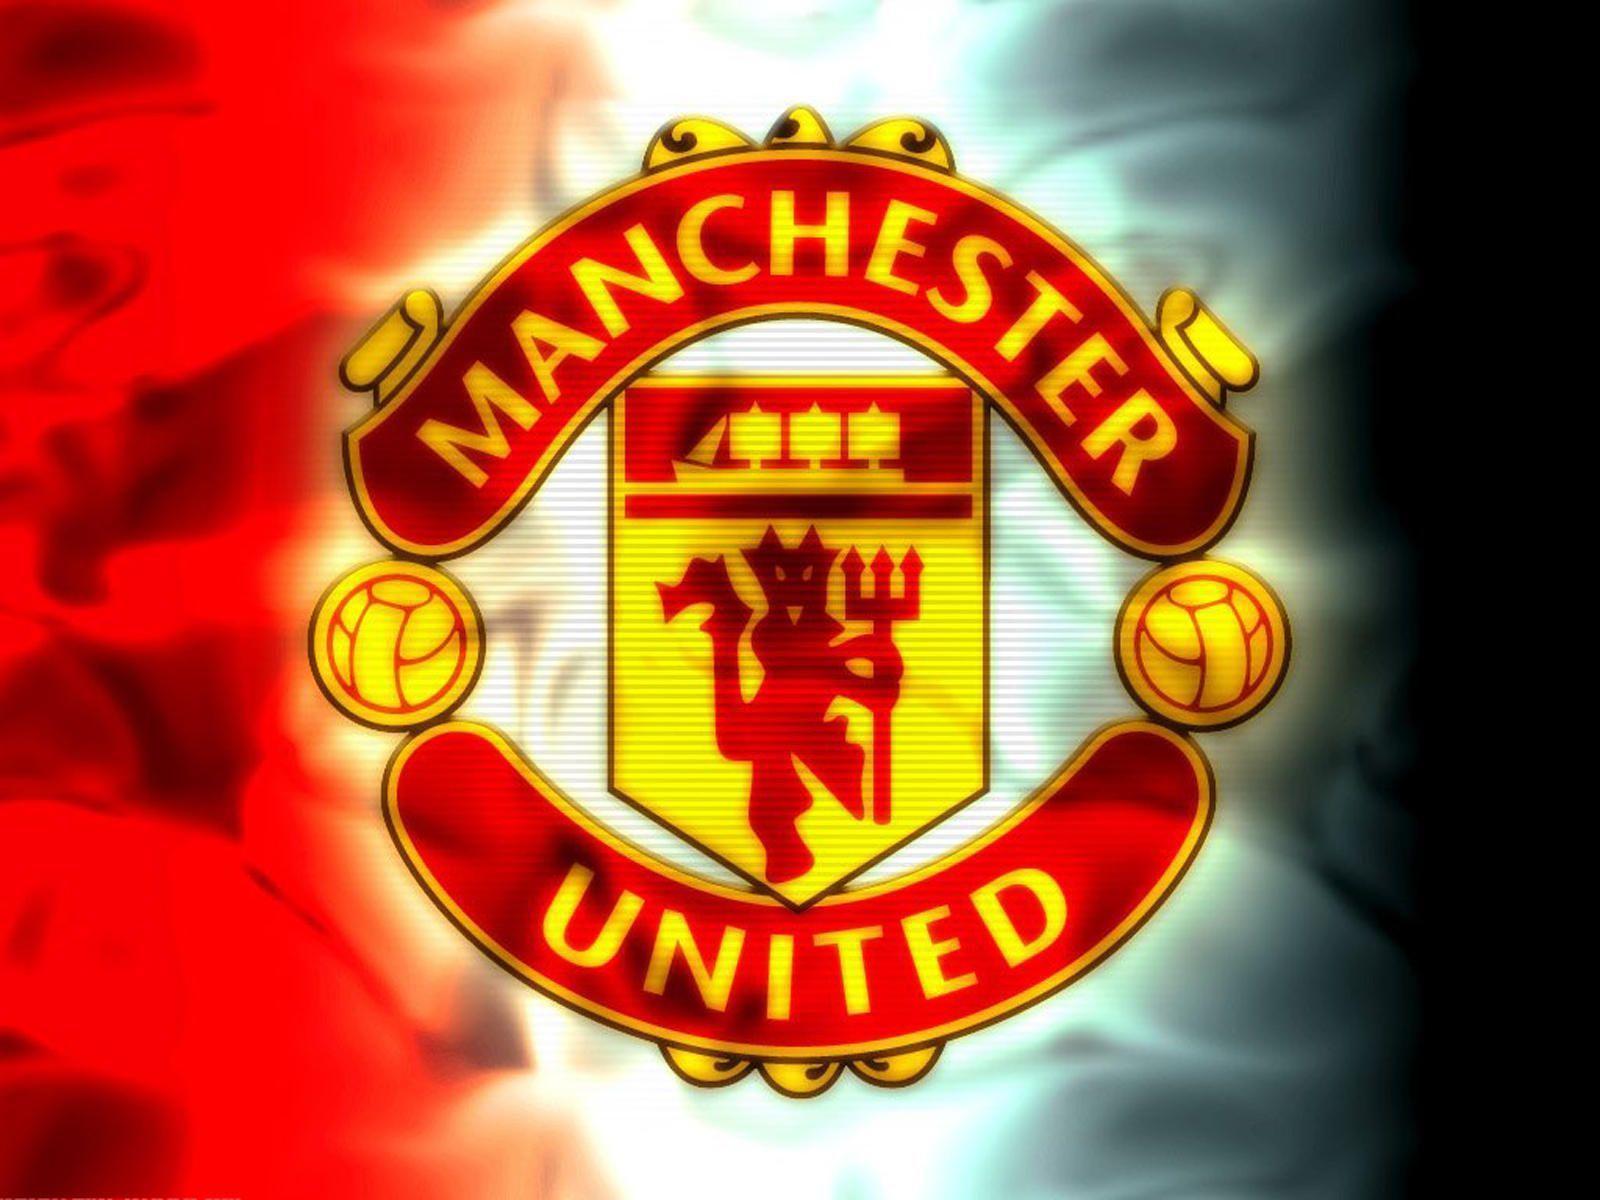 Manchester United Wallpaper. Excell. Manchester united